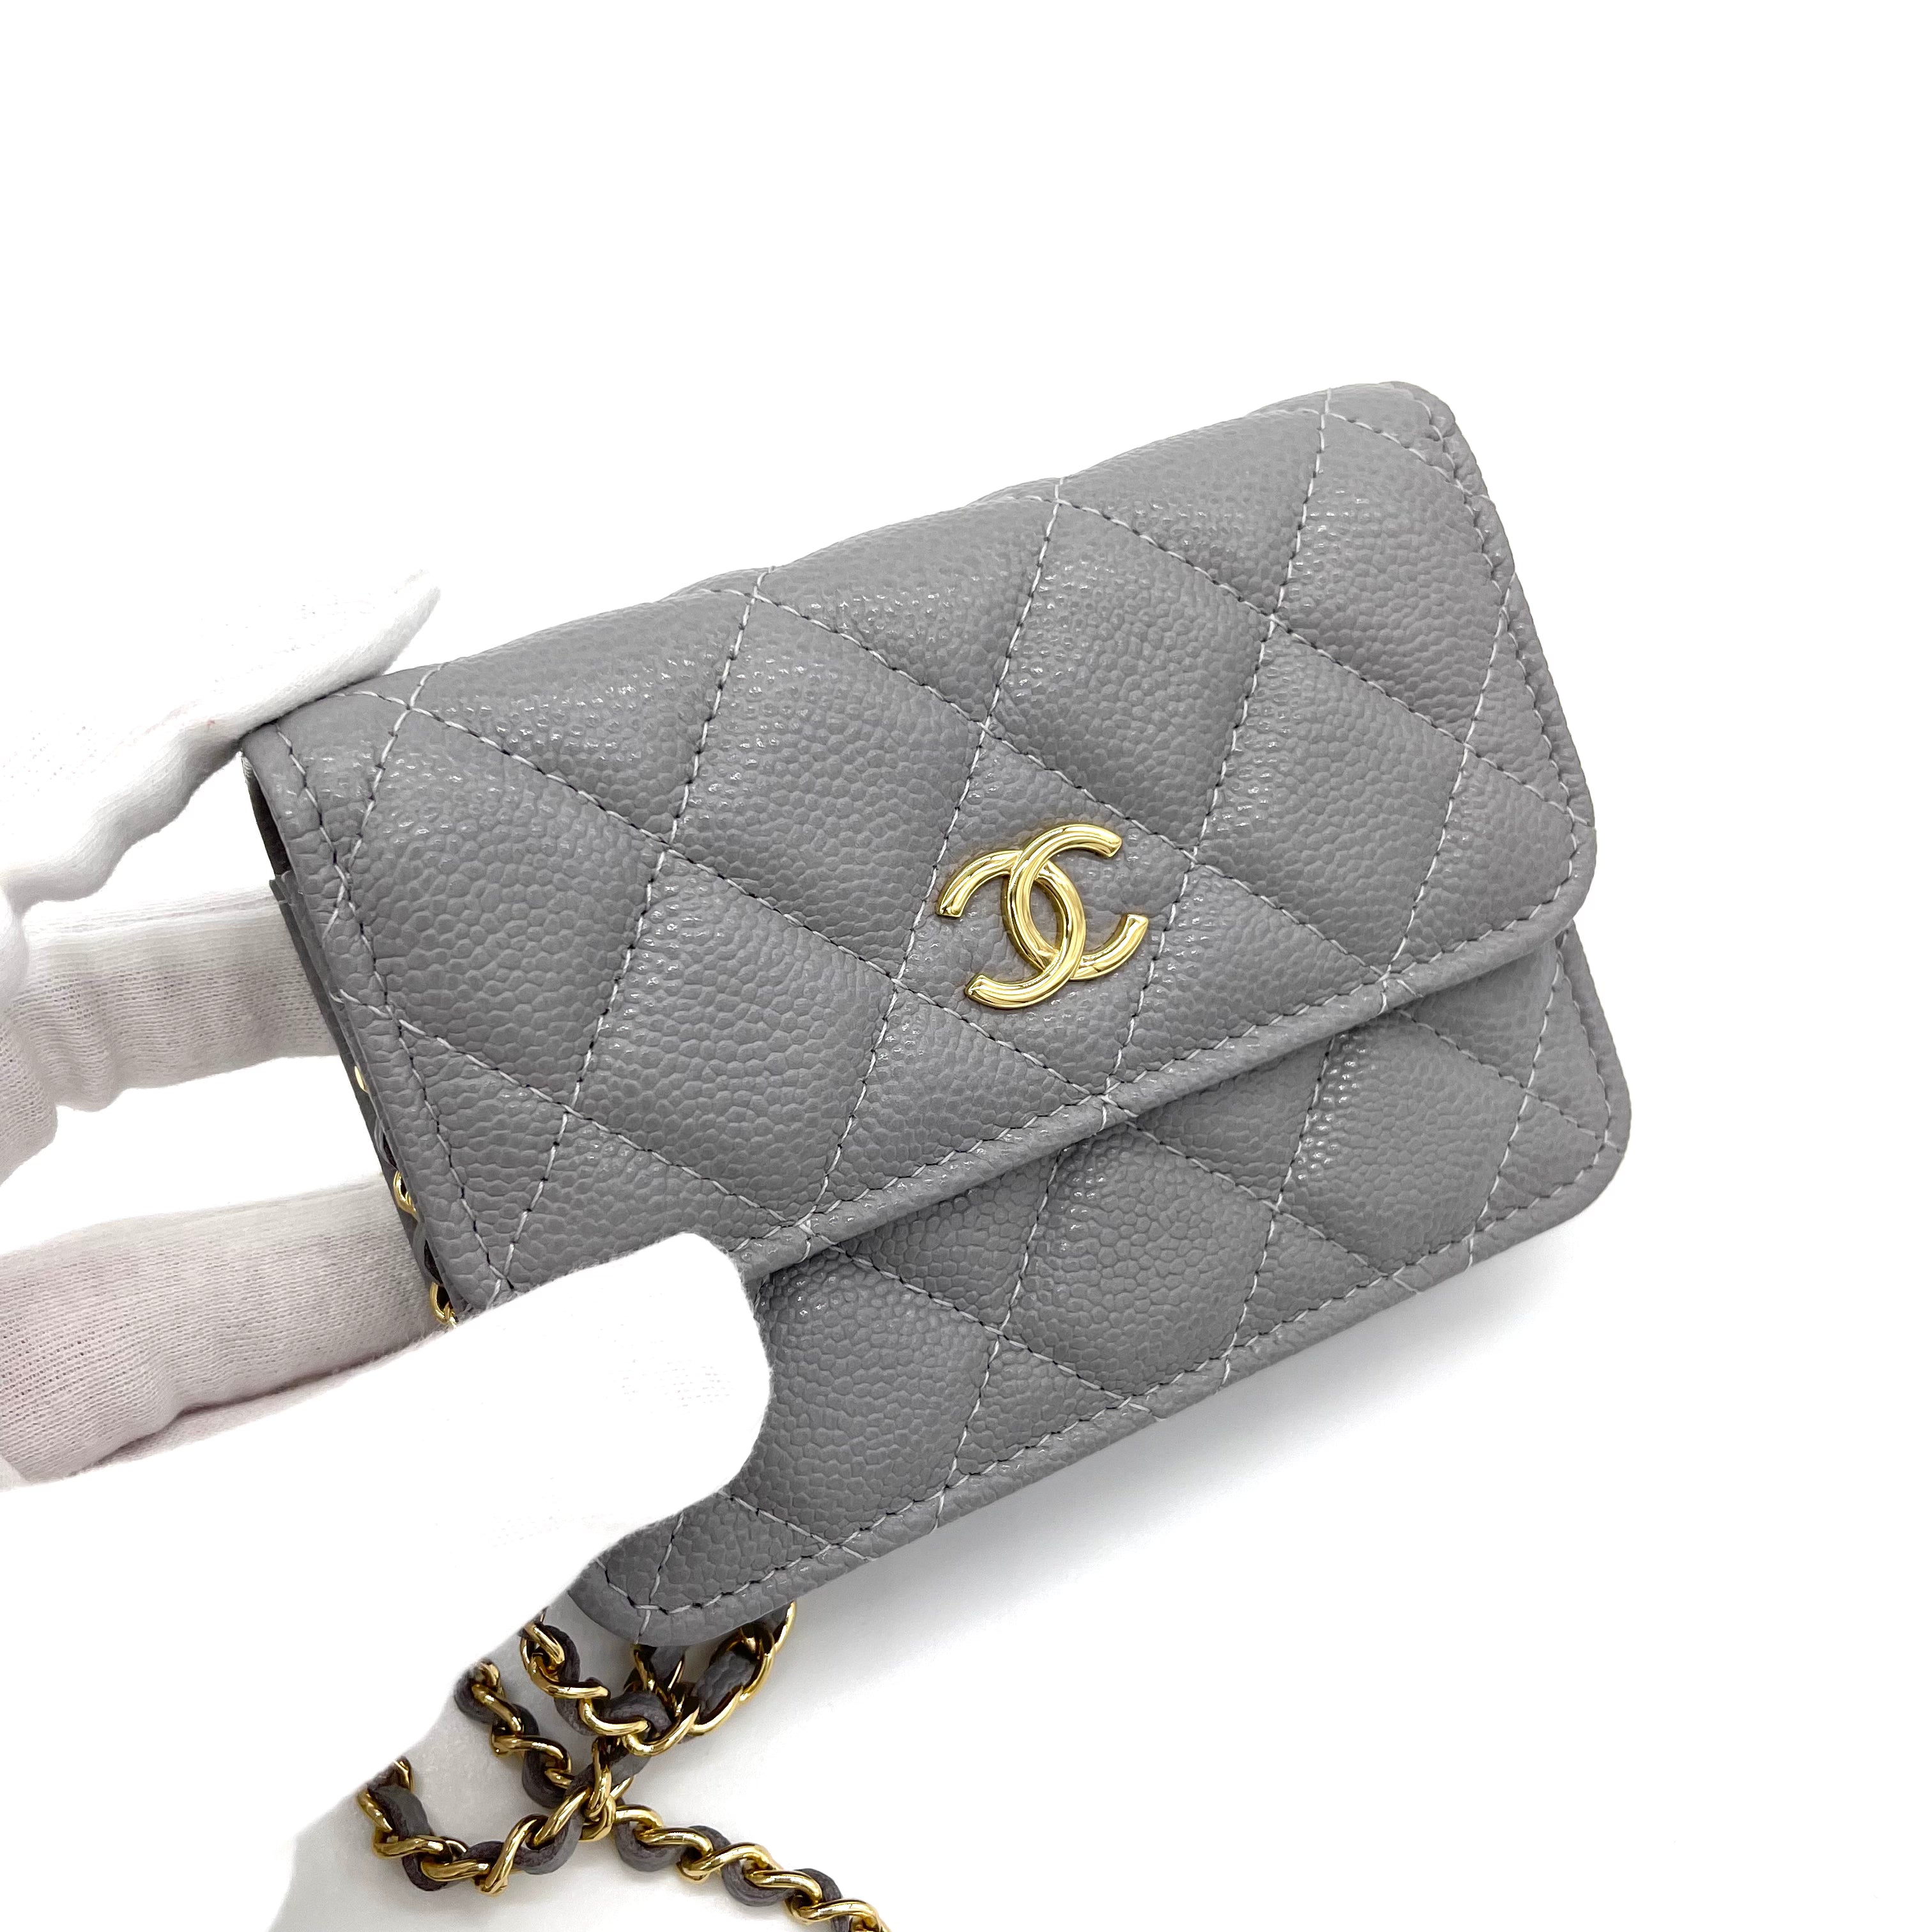 New Chanel Card Holder With Zip in - COME BAG BRANDNAME